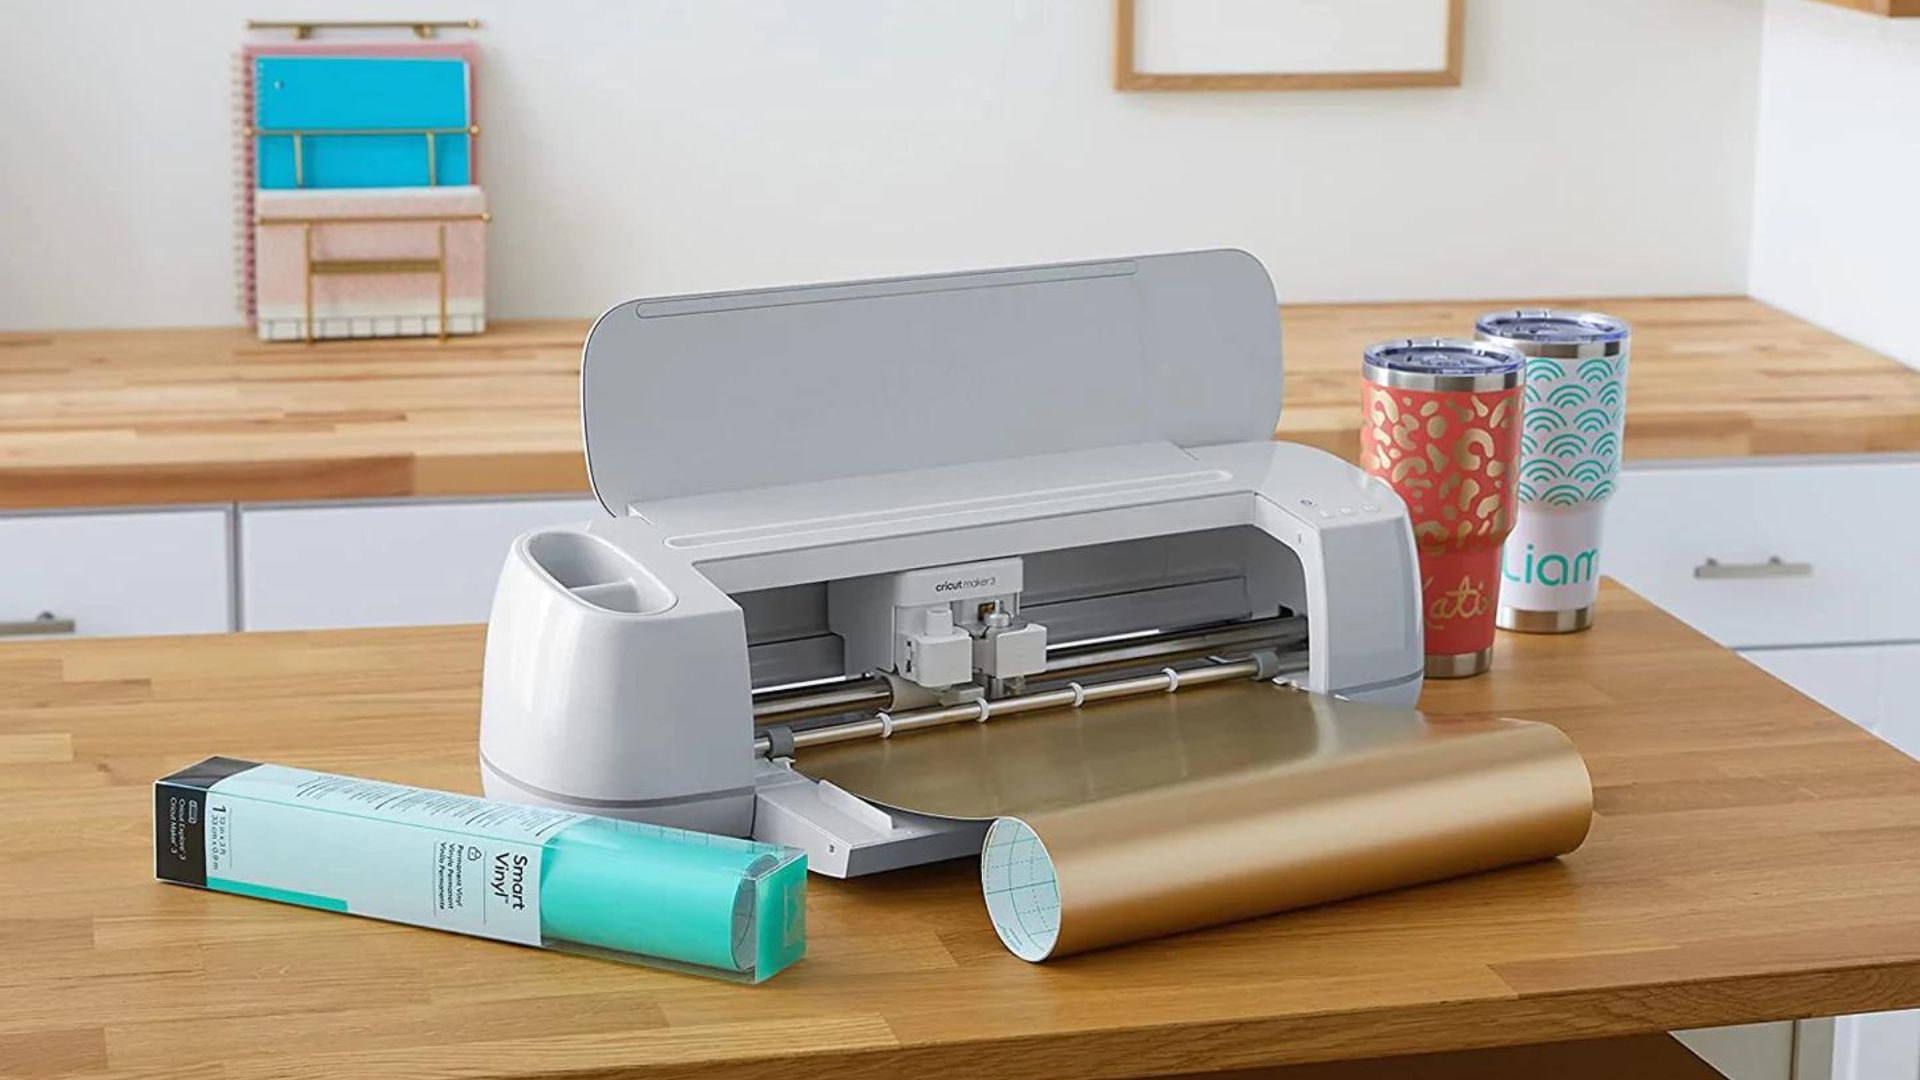 How to Use the Cricut Maker 3 [Cricut for Beginners]